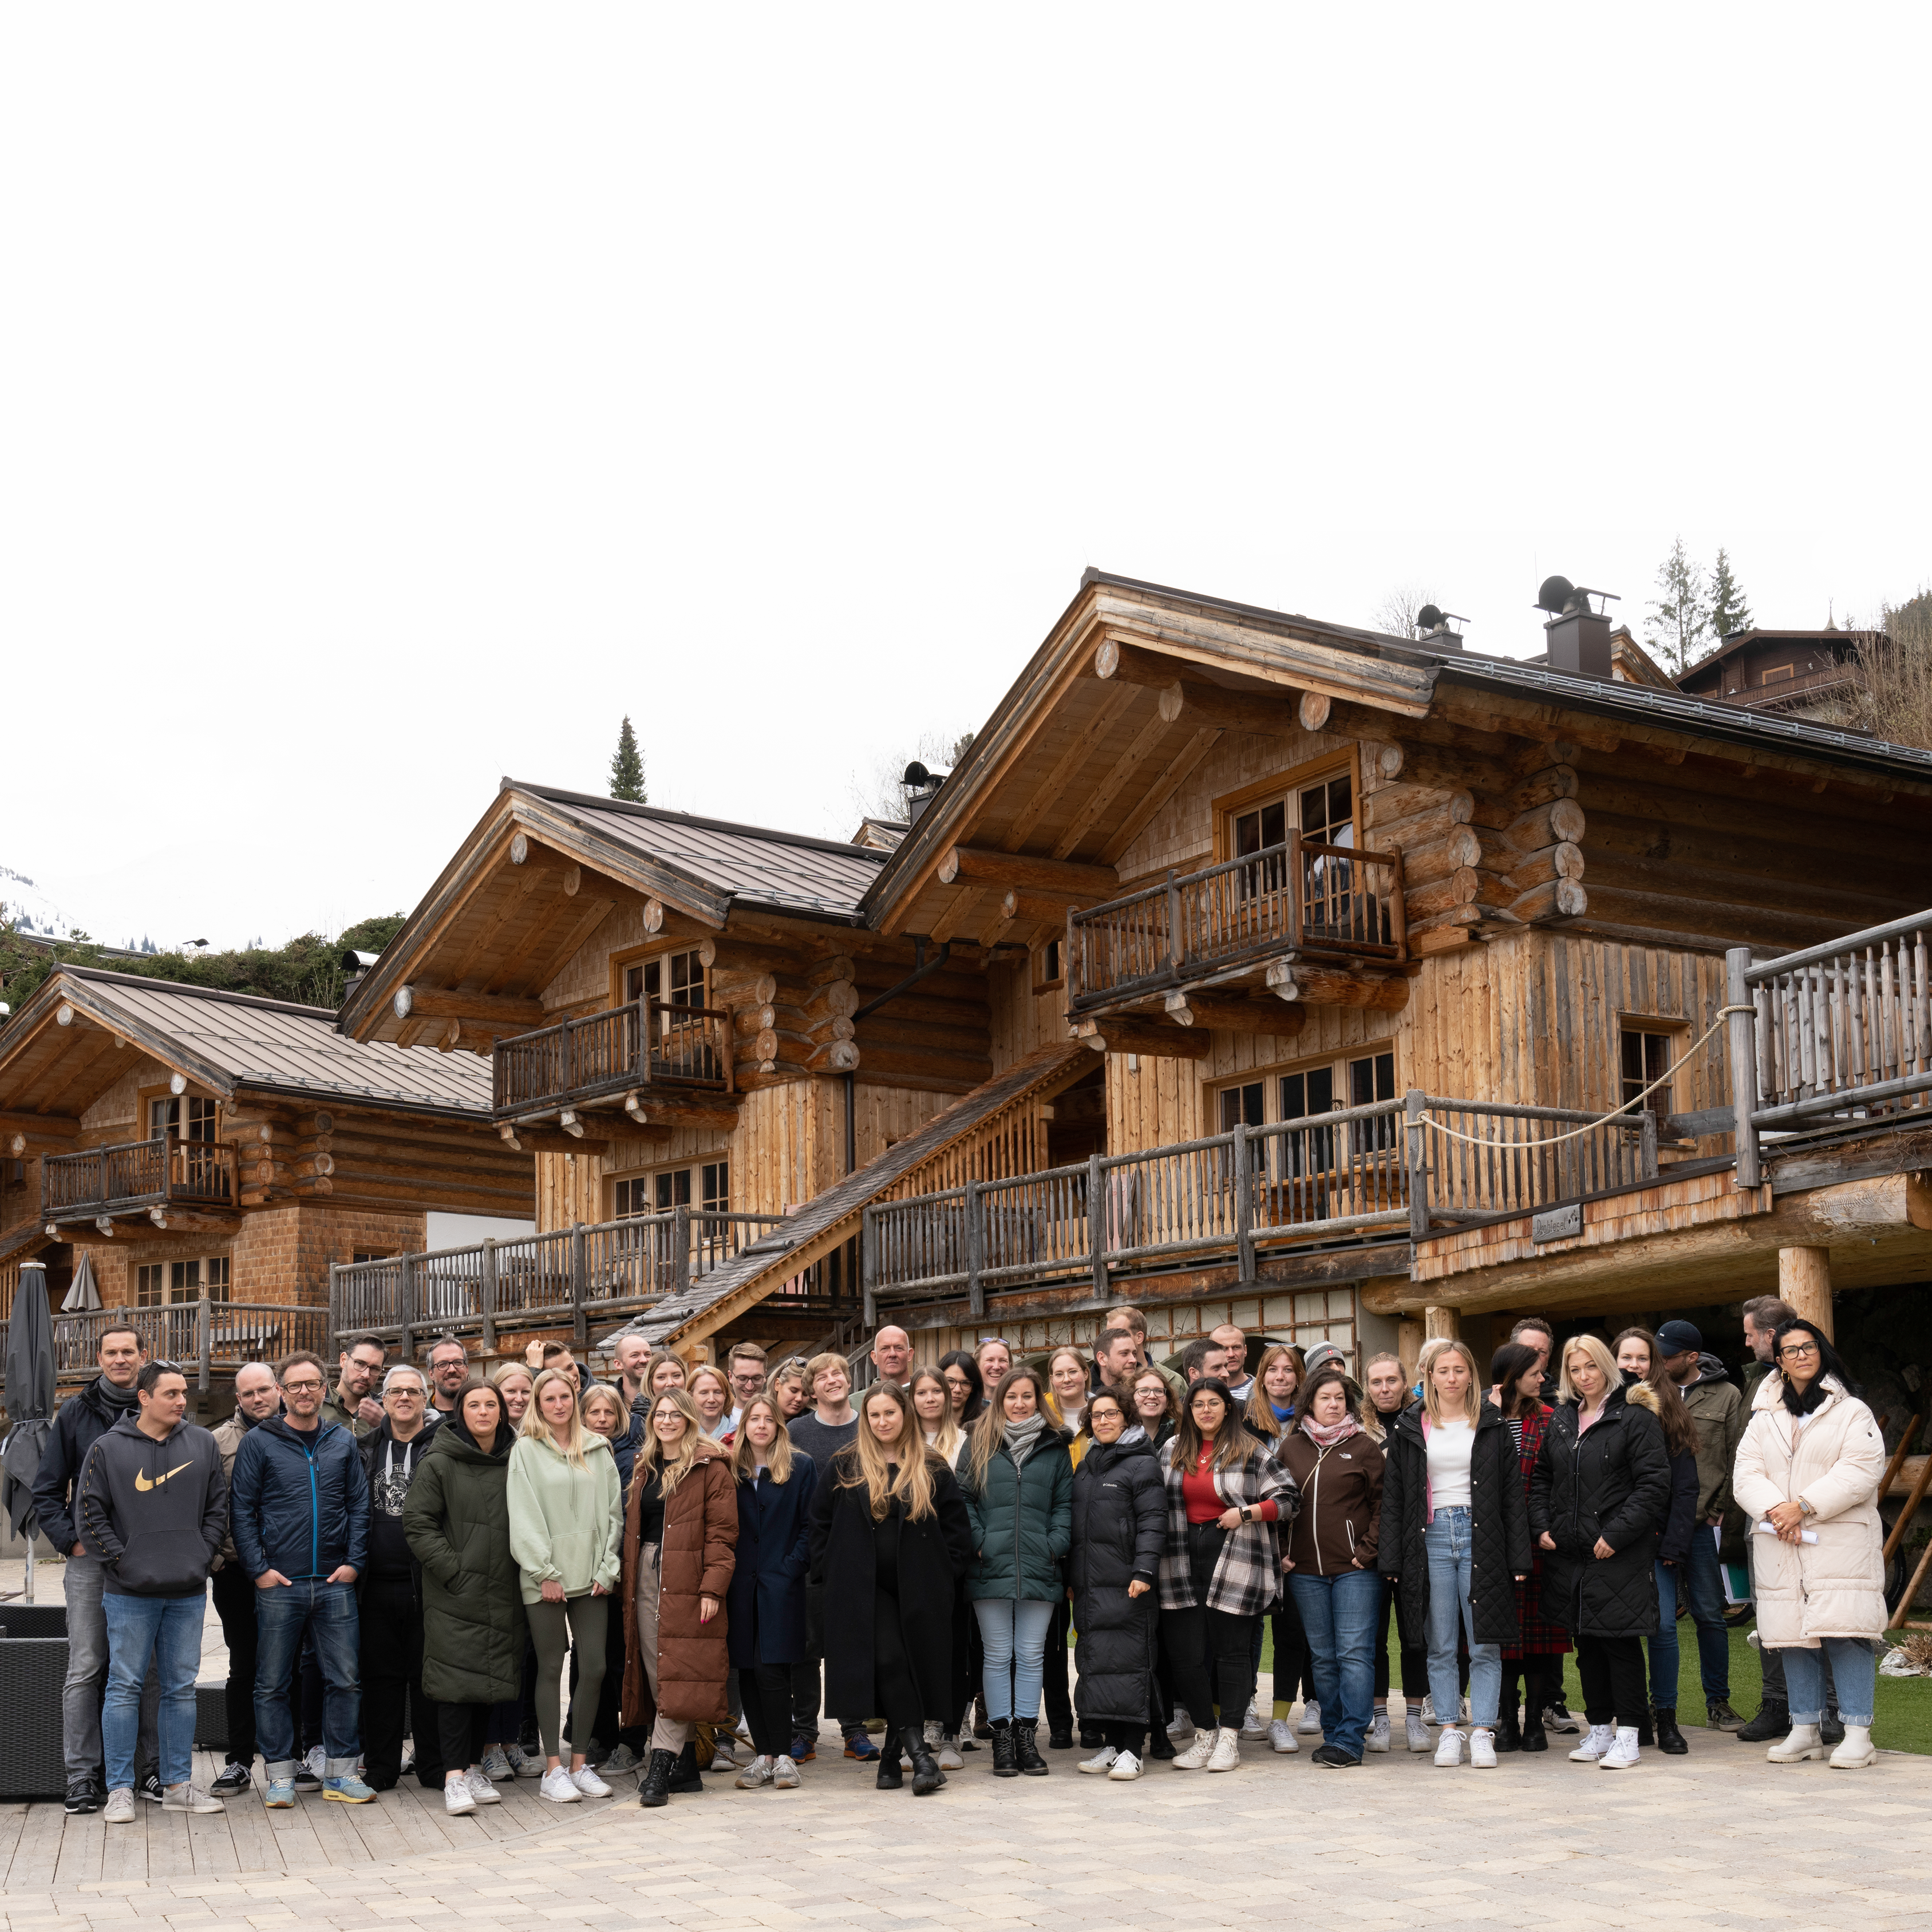 Picture of many employees of the Jung von Matt Netzeffekt office. In the background bavarian, wooden accommodation and a mountain can be seen.